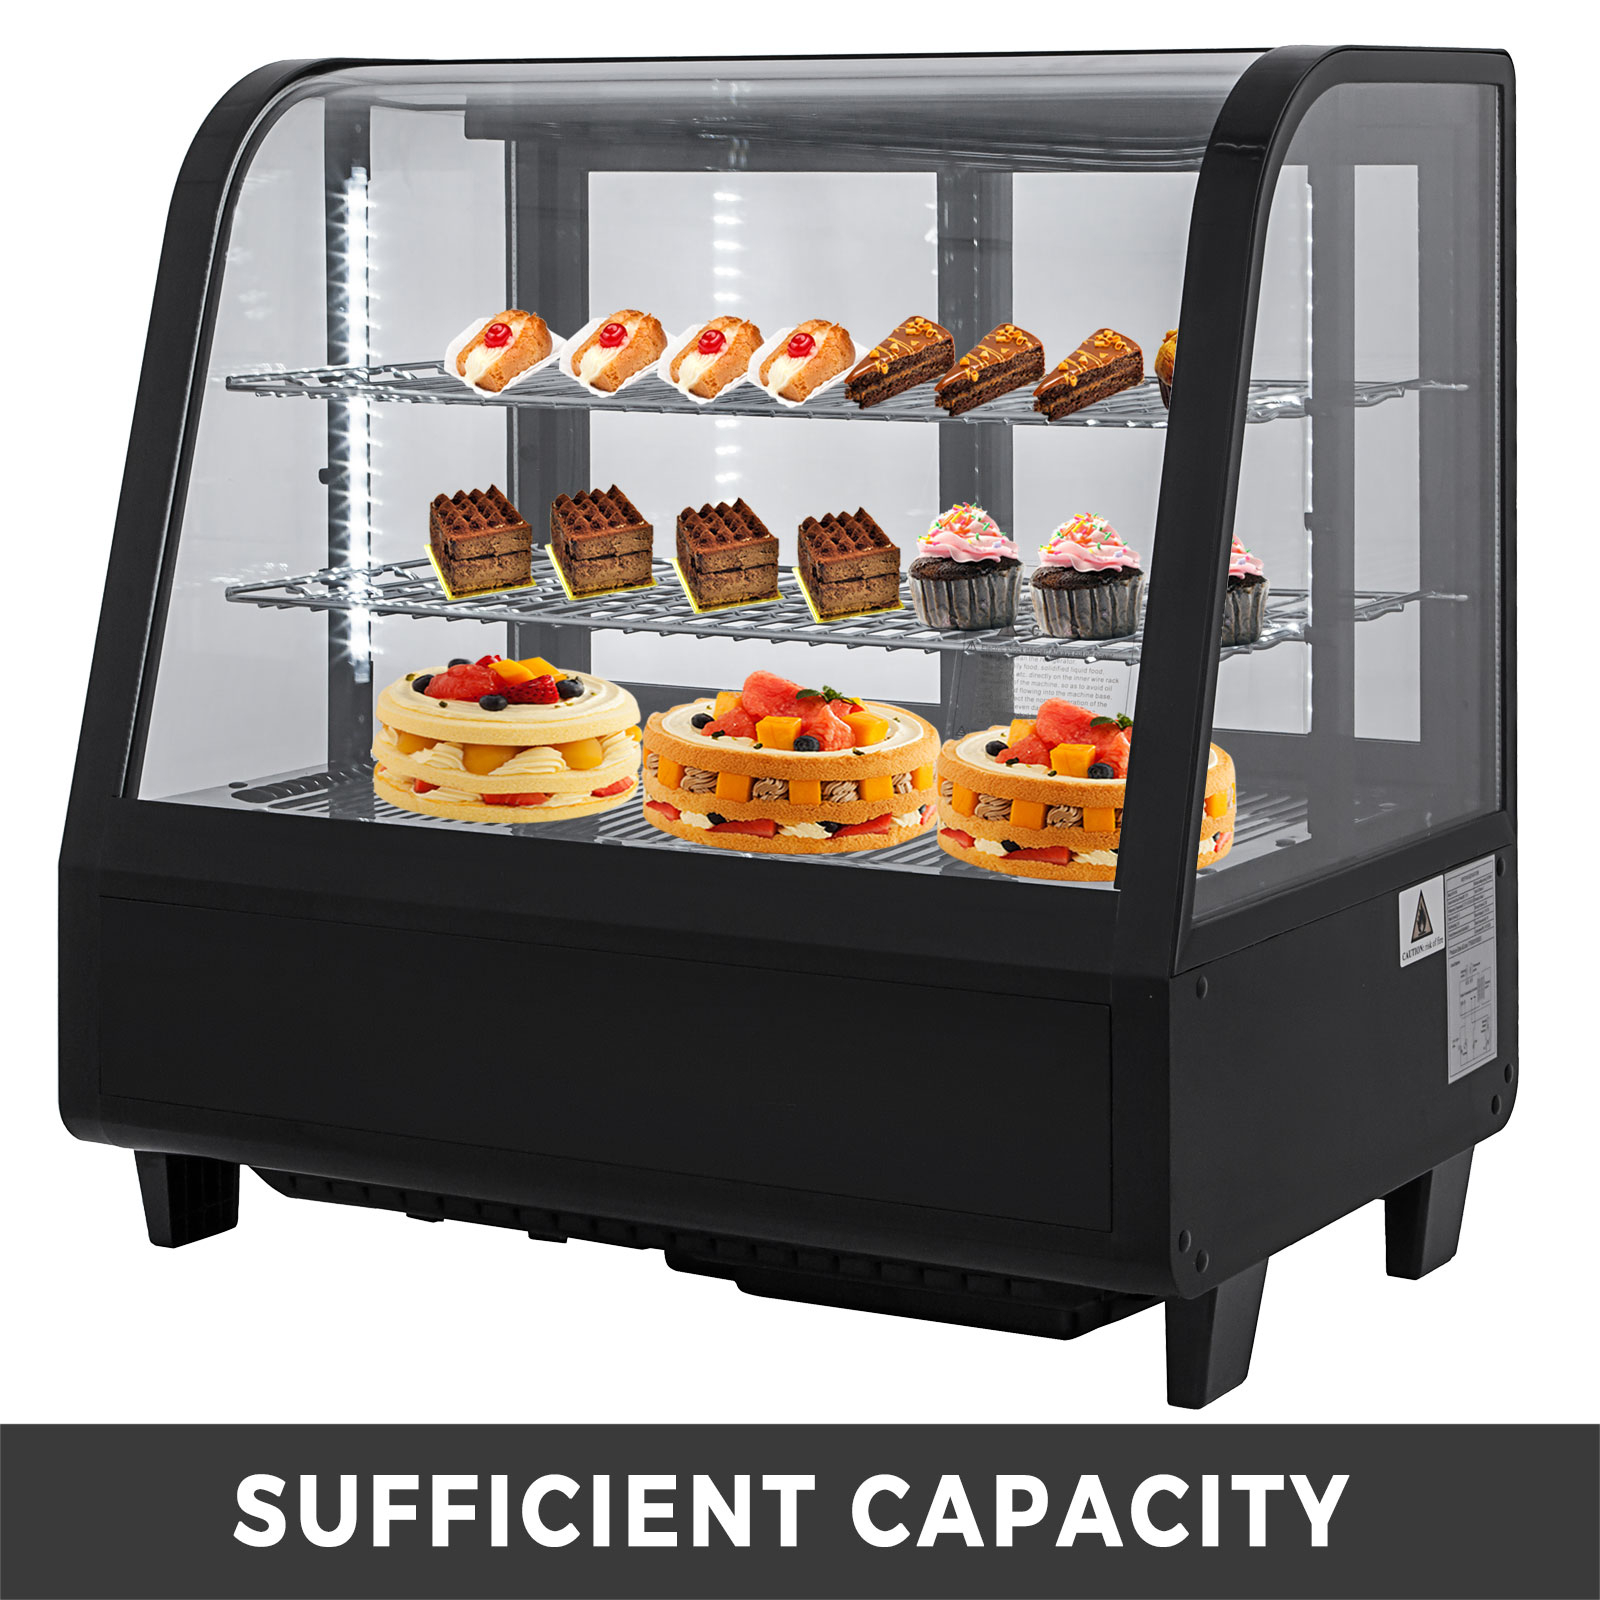 Countertop Bakery Display Case Commercial Refrigerated Display with Auto Defrost 